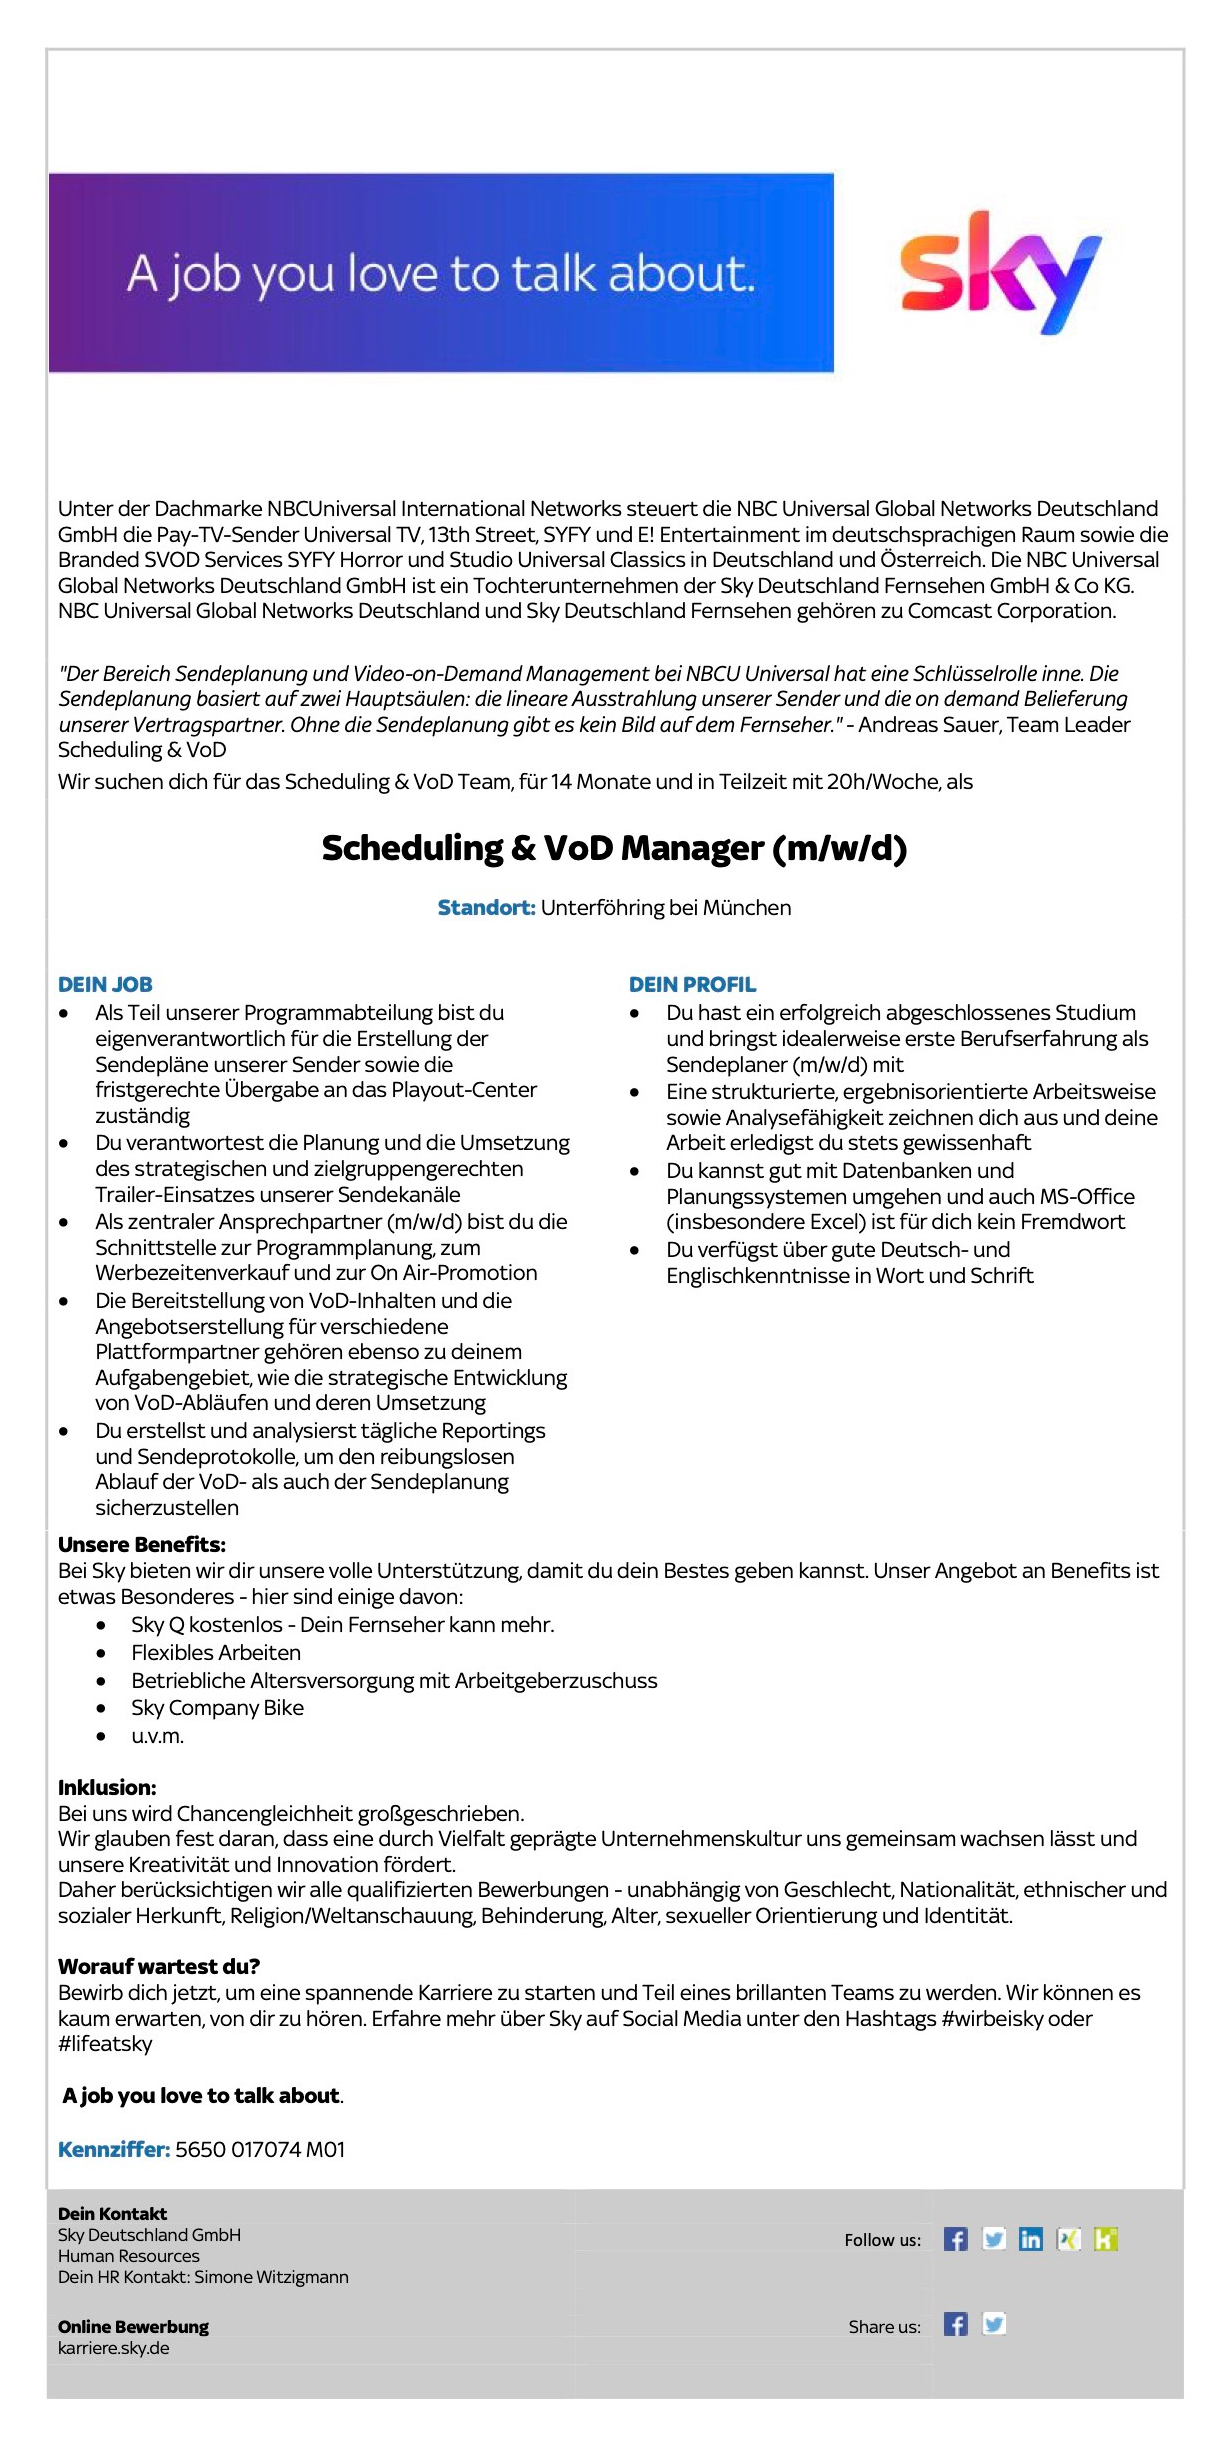 Scheduling & VoD Manager (m/w/d)